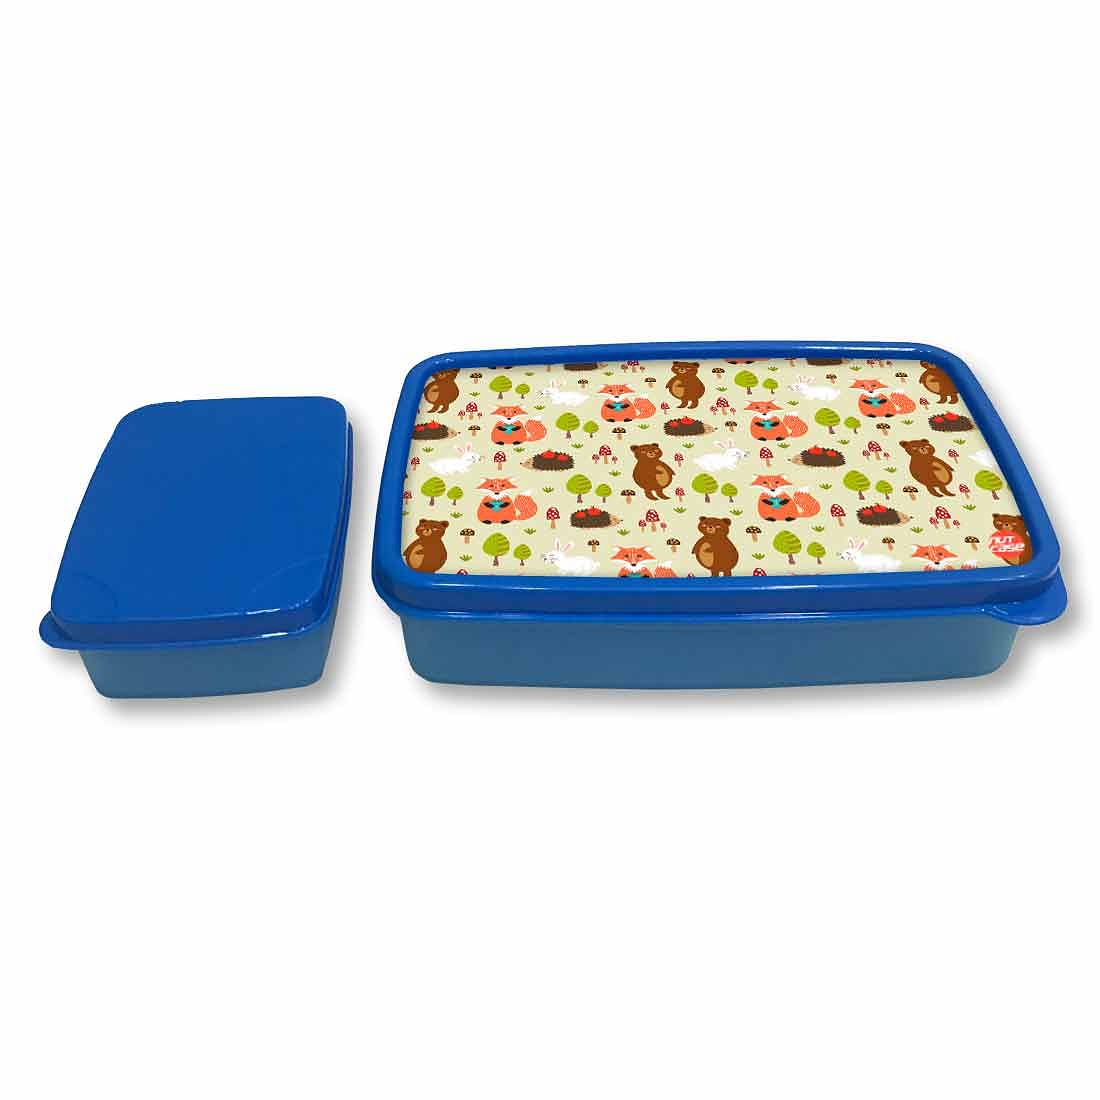 Snacks Biscuit Box for Kids School Lunch Box - Rabbit and Bear Nutcase